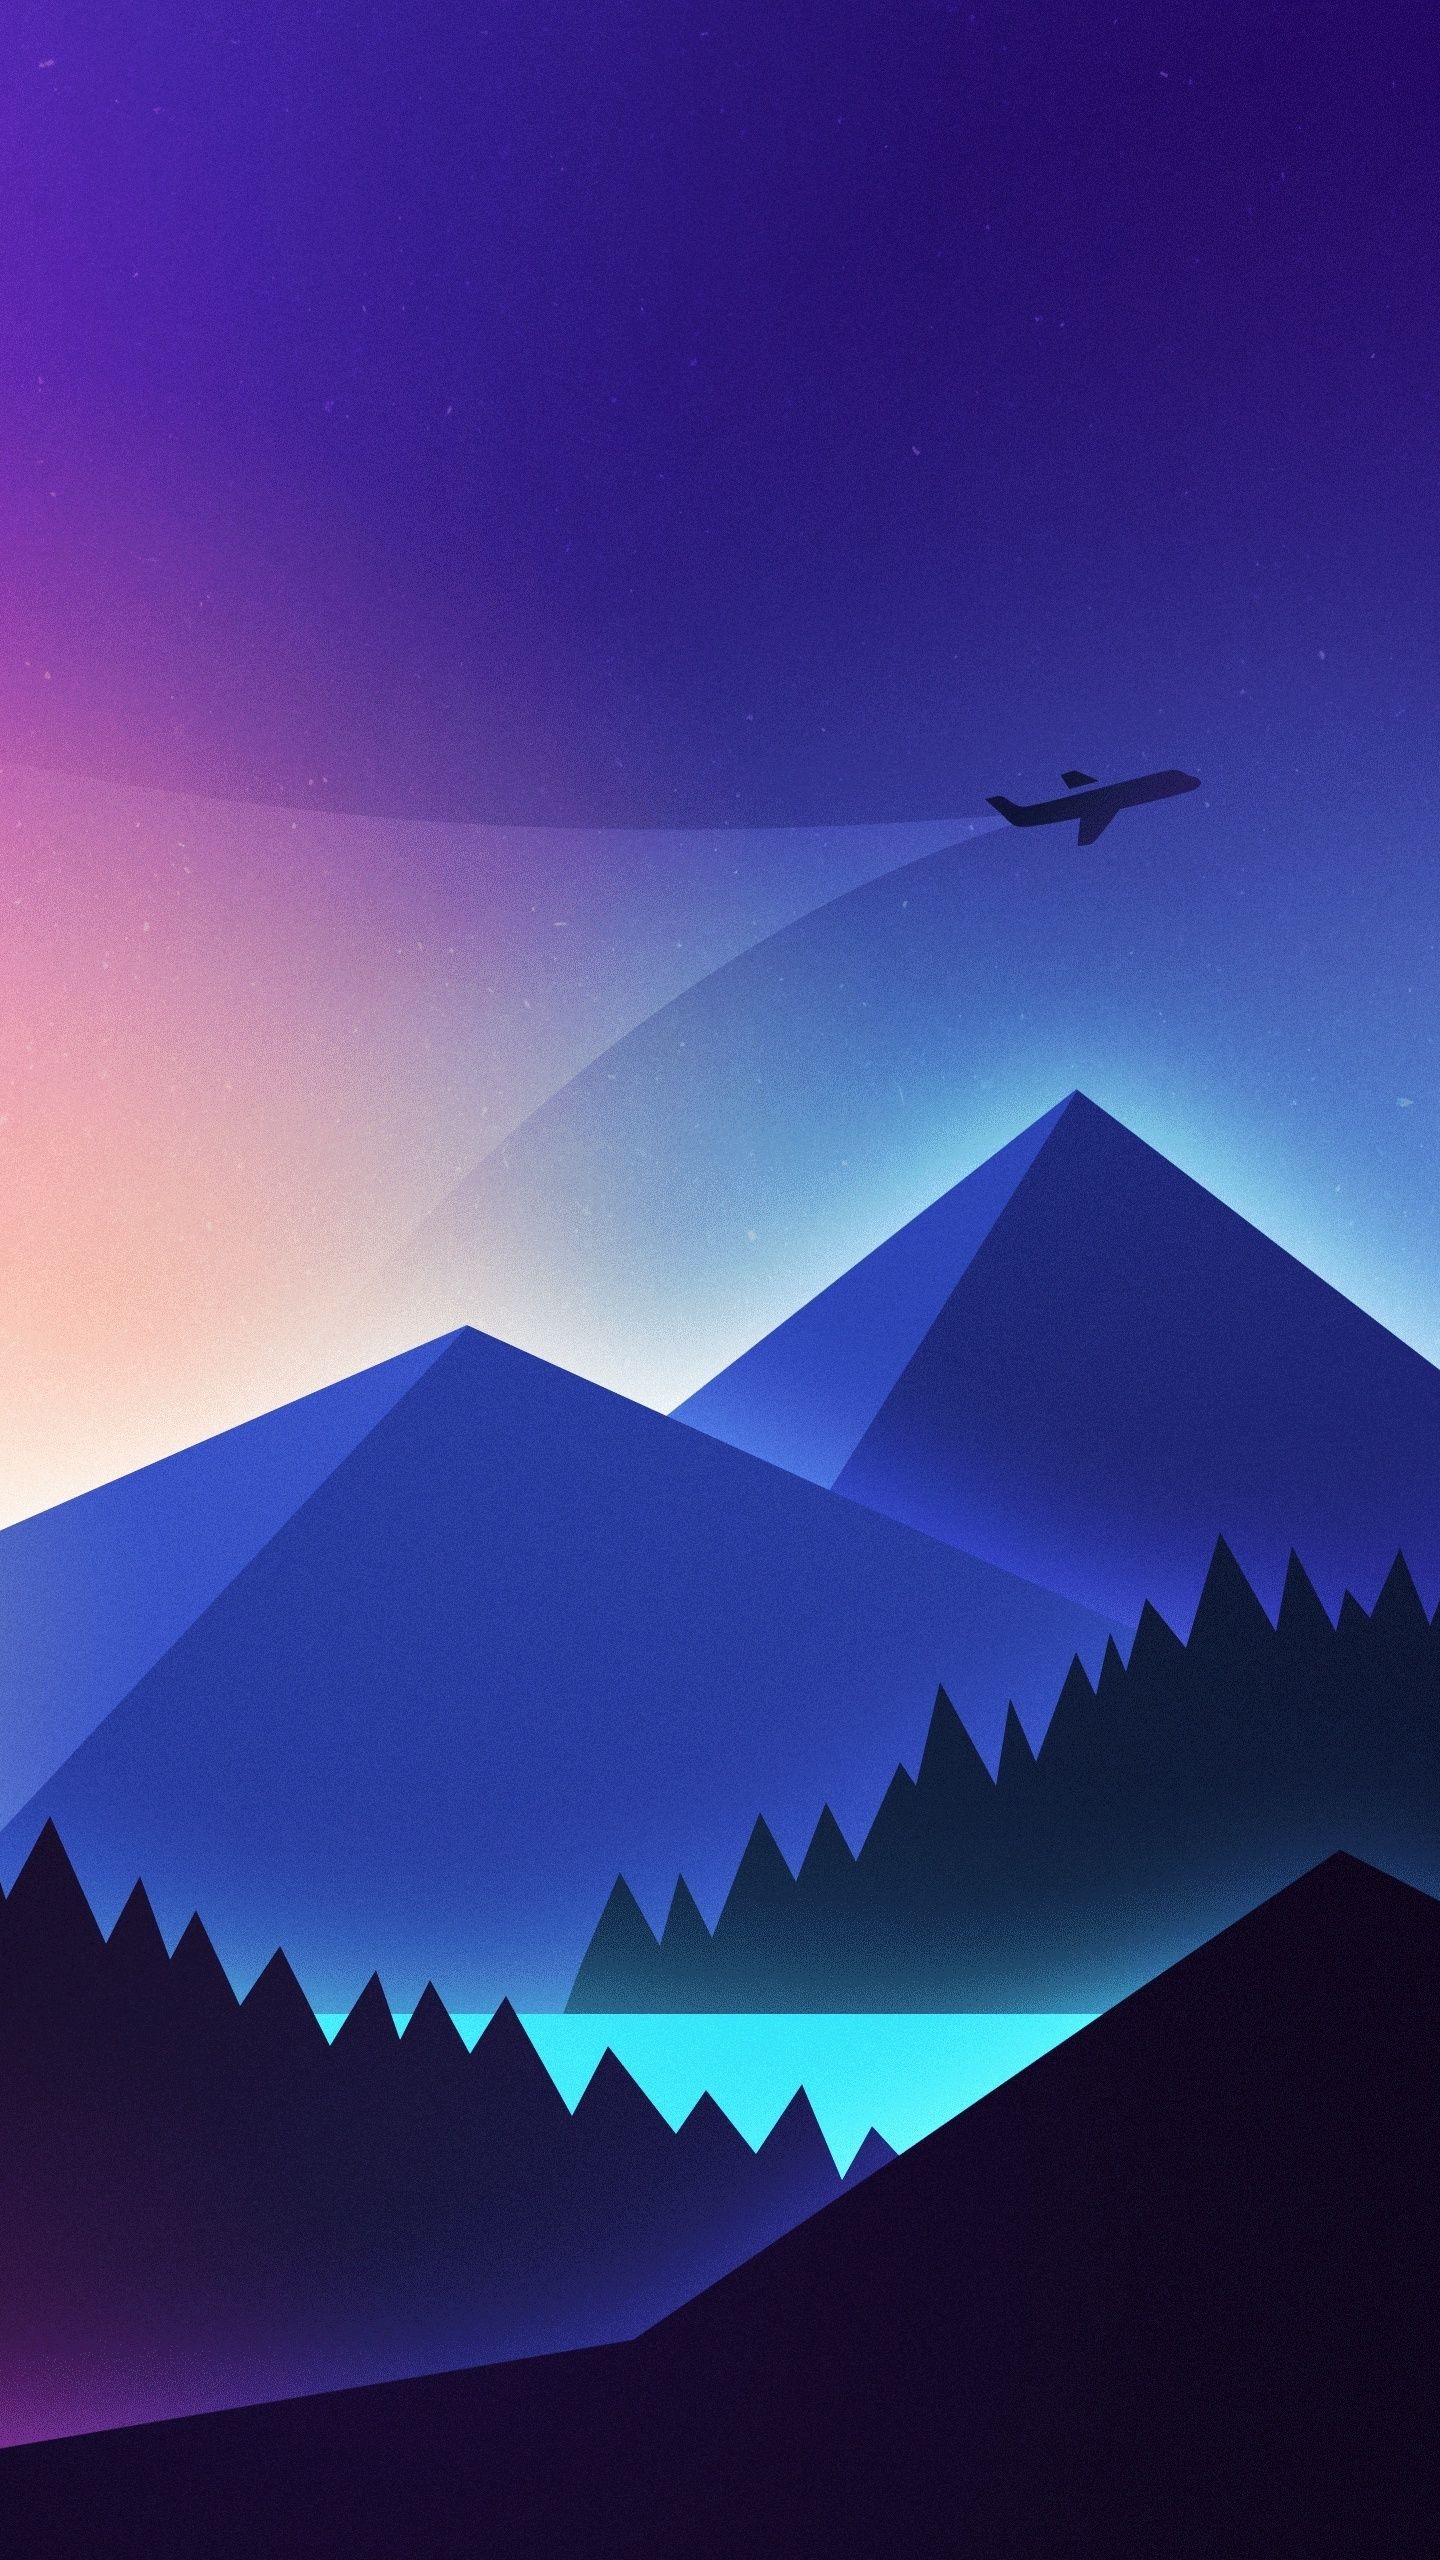 Download 1440x2560 wallpaper minimalism, airplane over mountains, gradient, qhd samsung galaxy s s edge, note, lg g 1440x2560 HD image, background, 8149